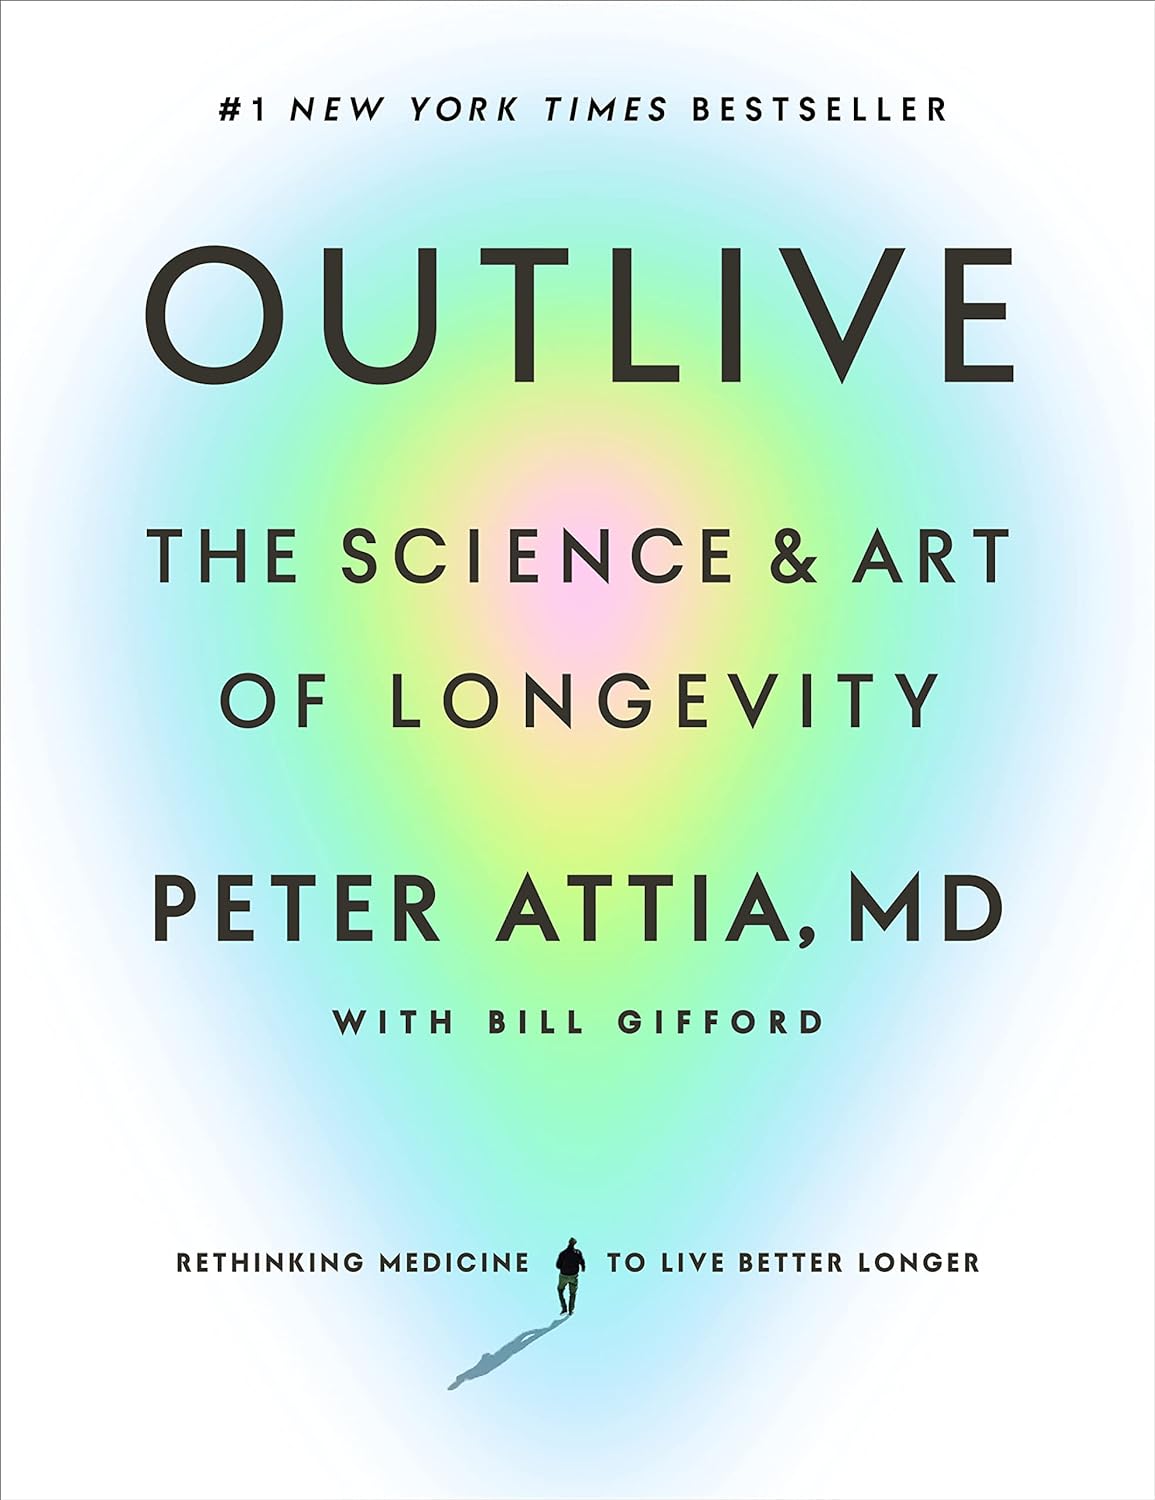 Outlive - The Science and Art of Longevity